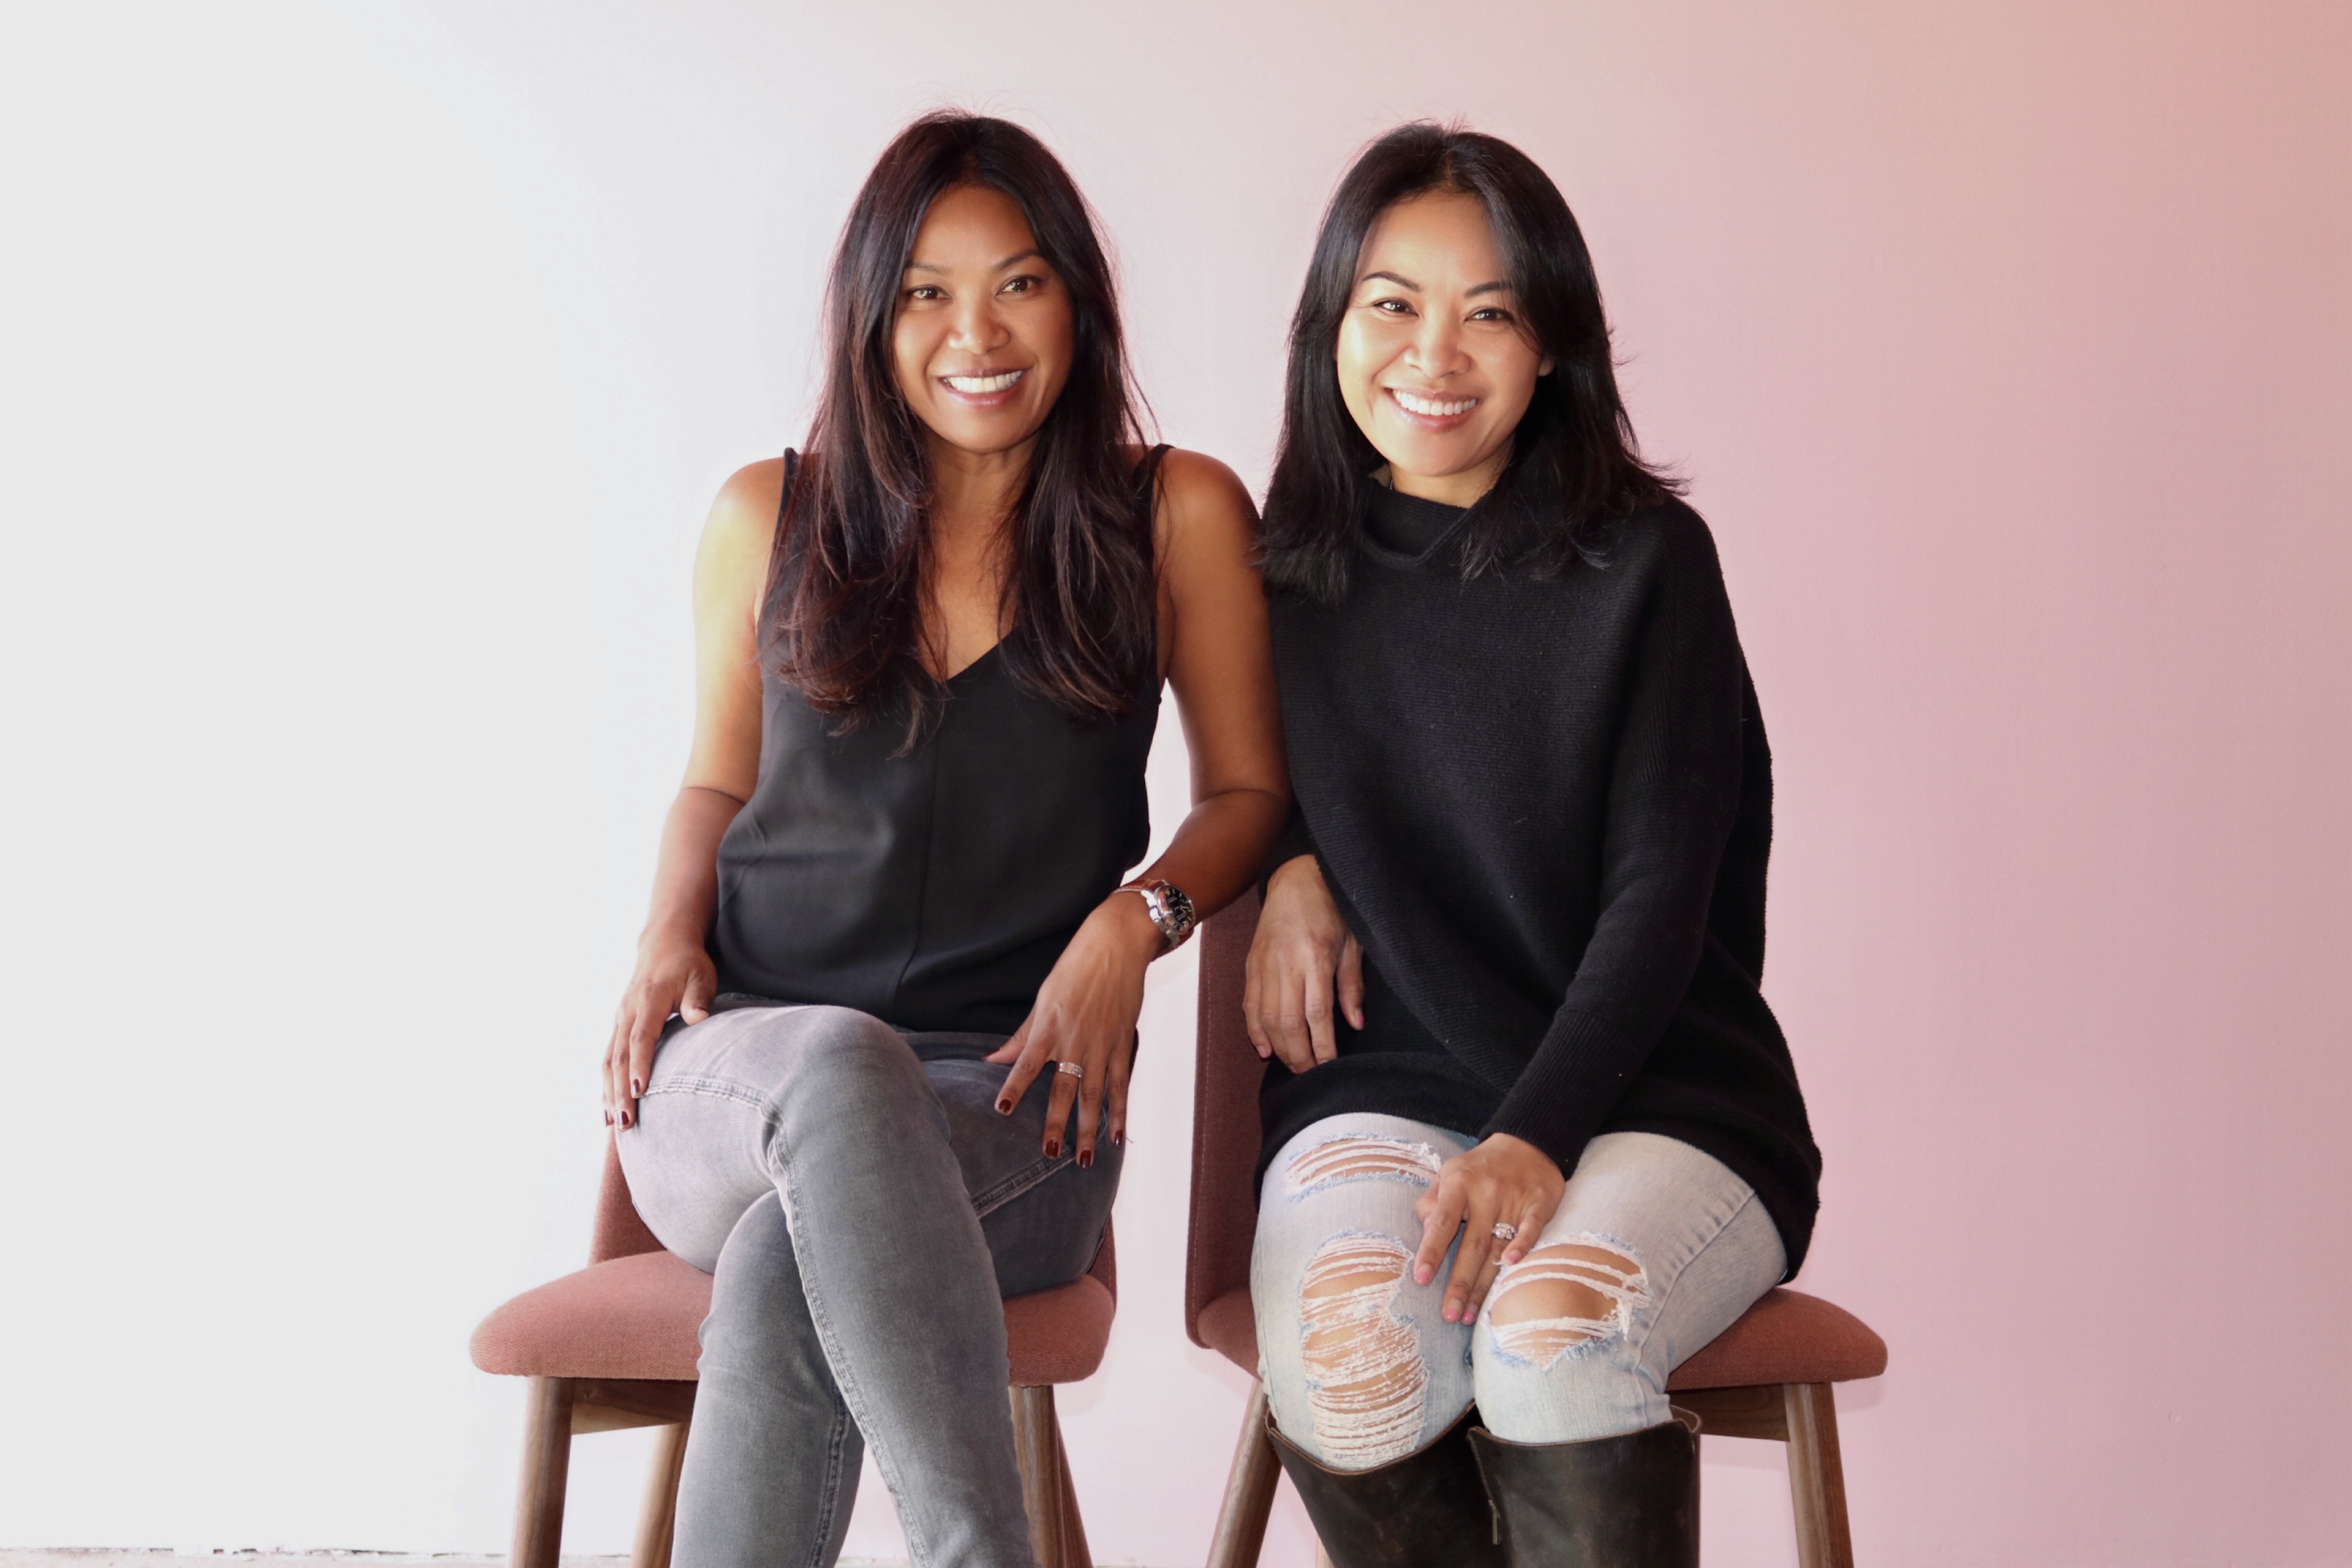 Katy Noochlaor and Chef Amanda Kuntee of Tuk Tuk Thai sitting on chairs with a pink background.